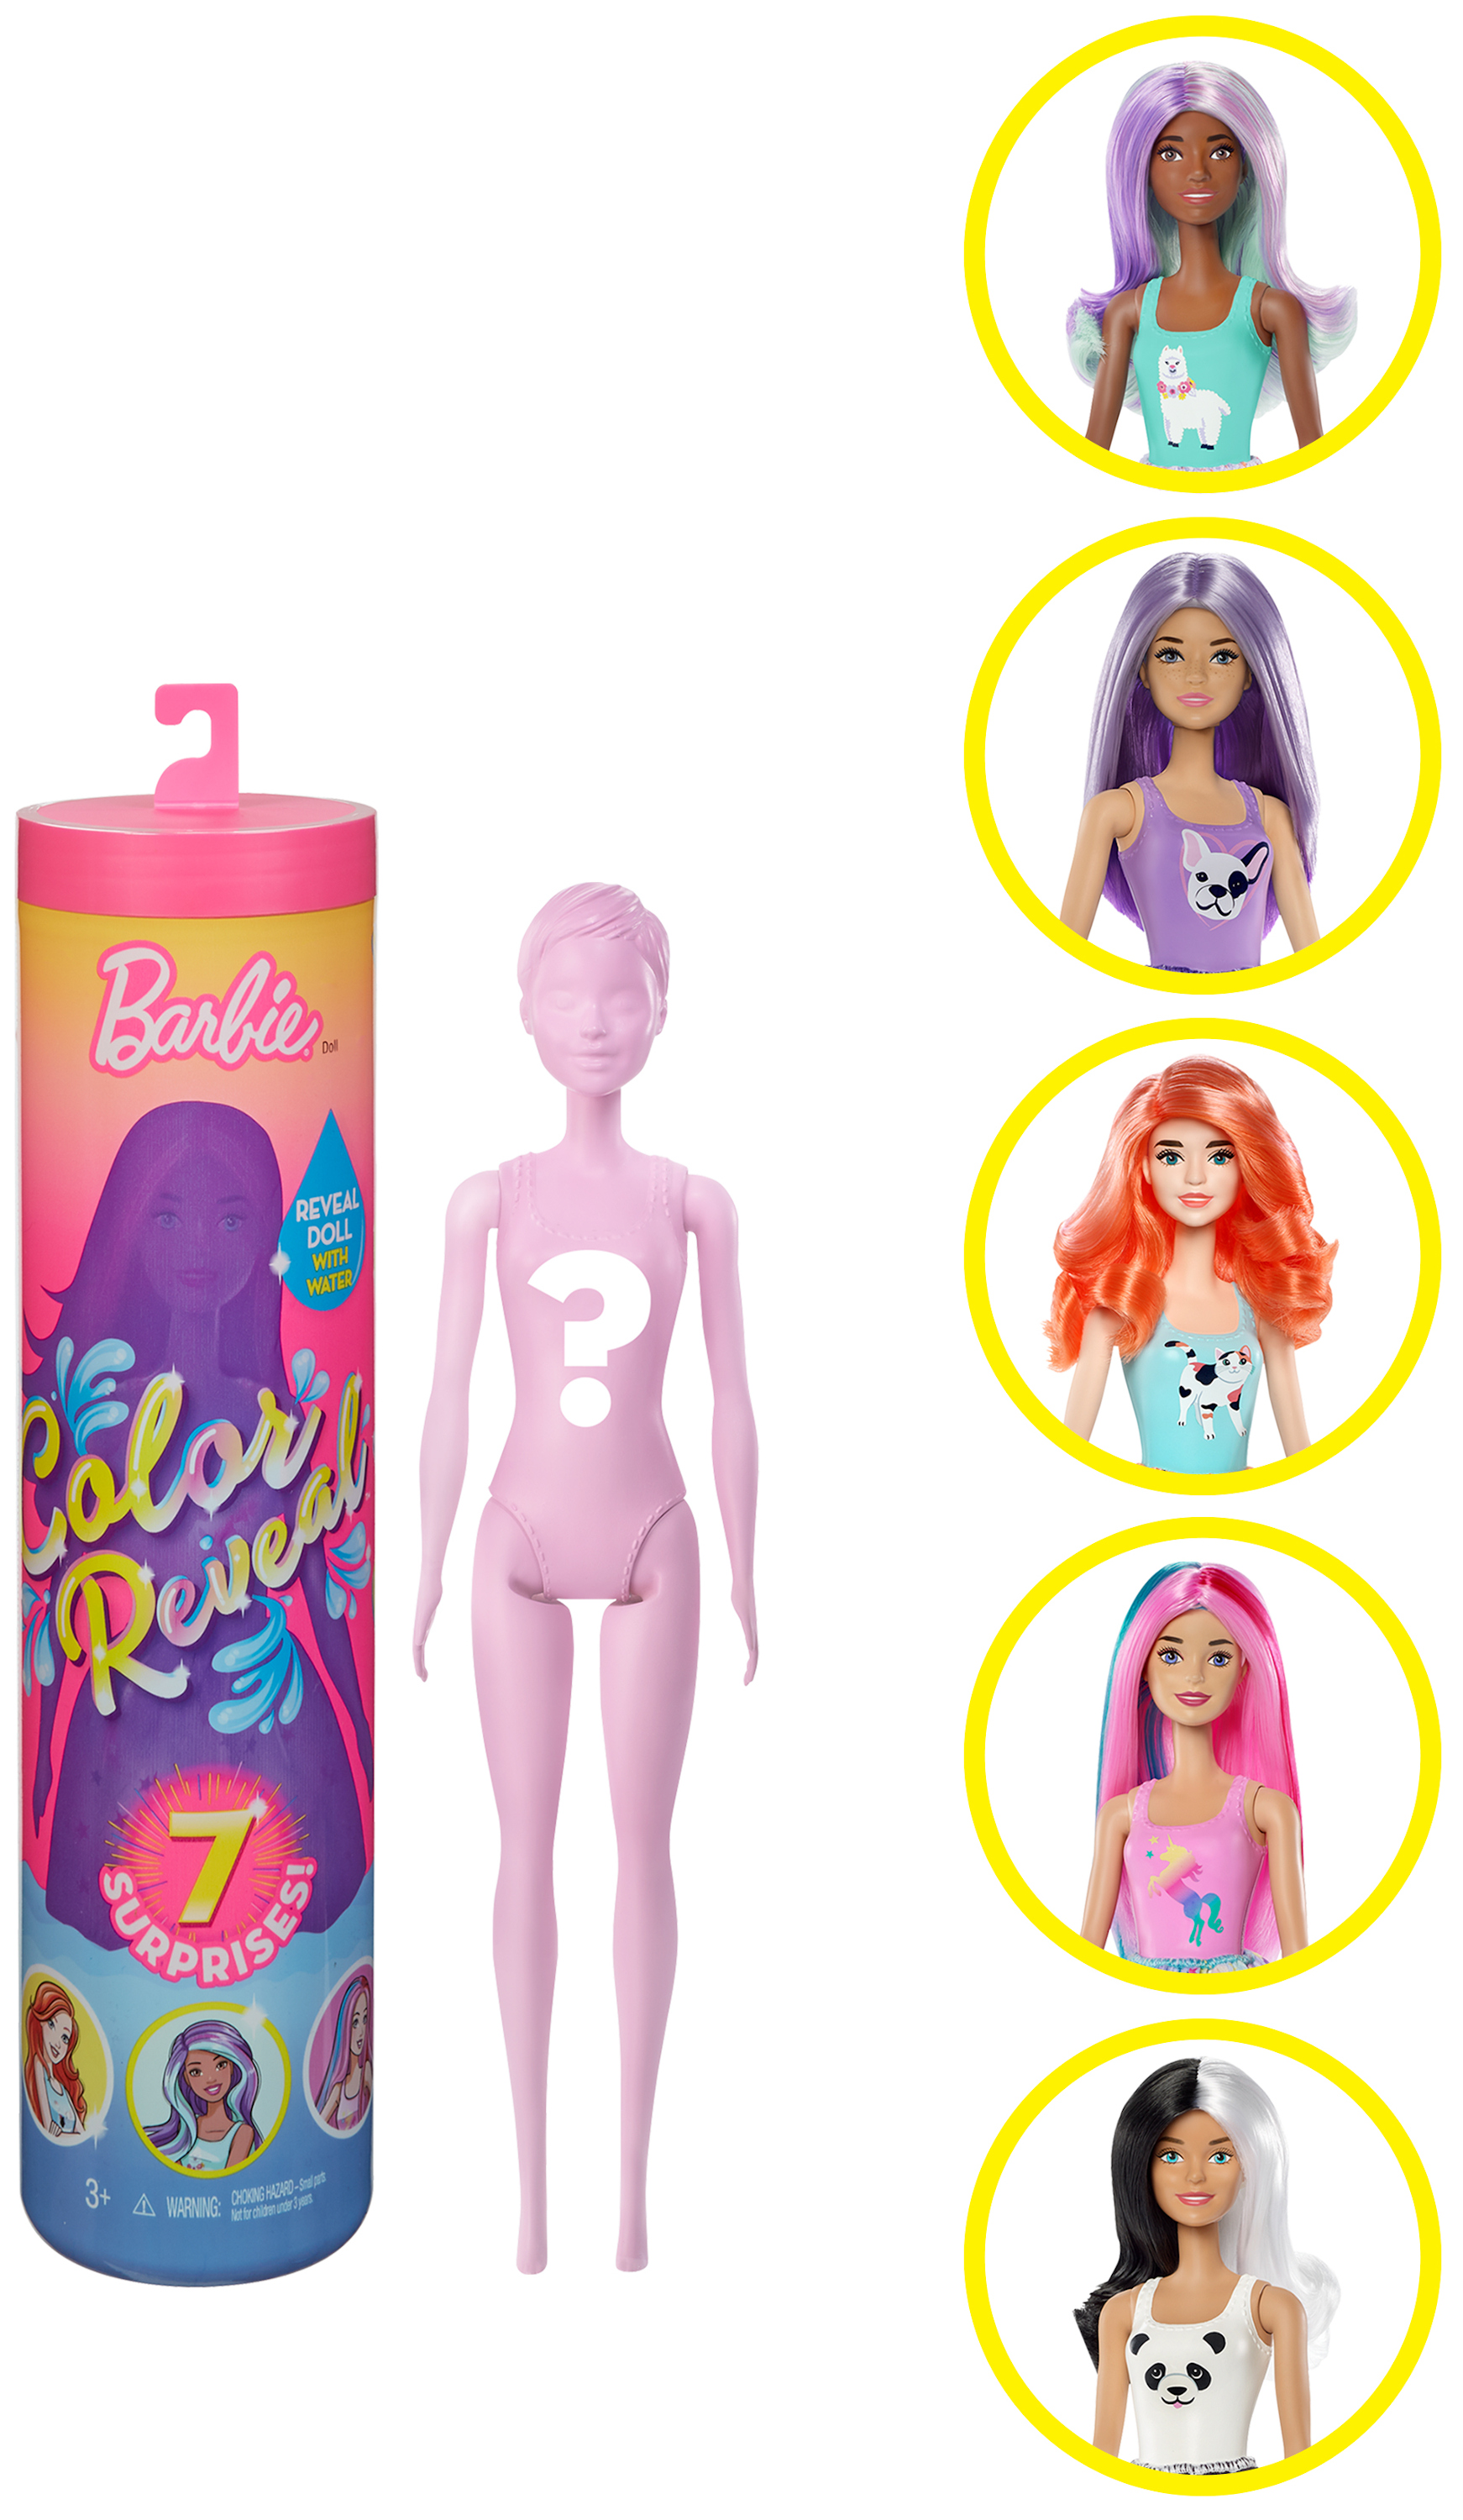 Barbie Color Reveal Doll With Surprises (Styles May Vary) Doll Playset, 7 Pieces Included - image 1 of 8